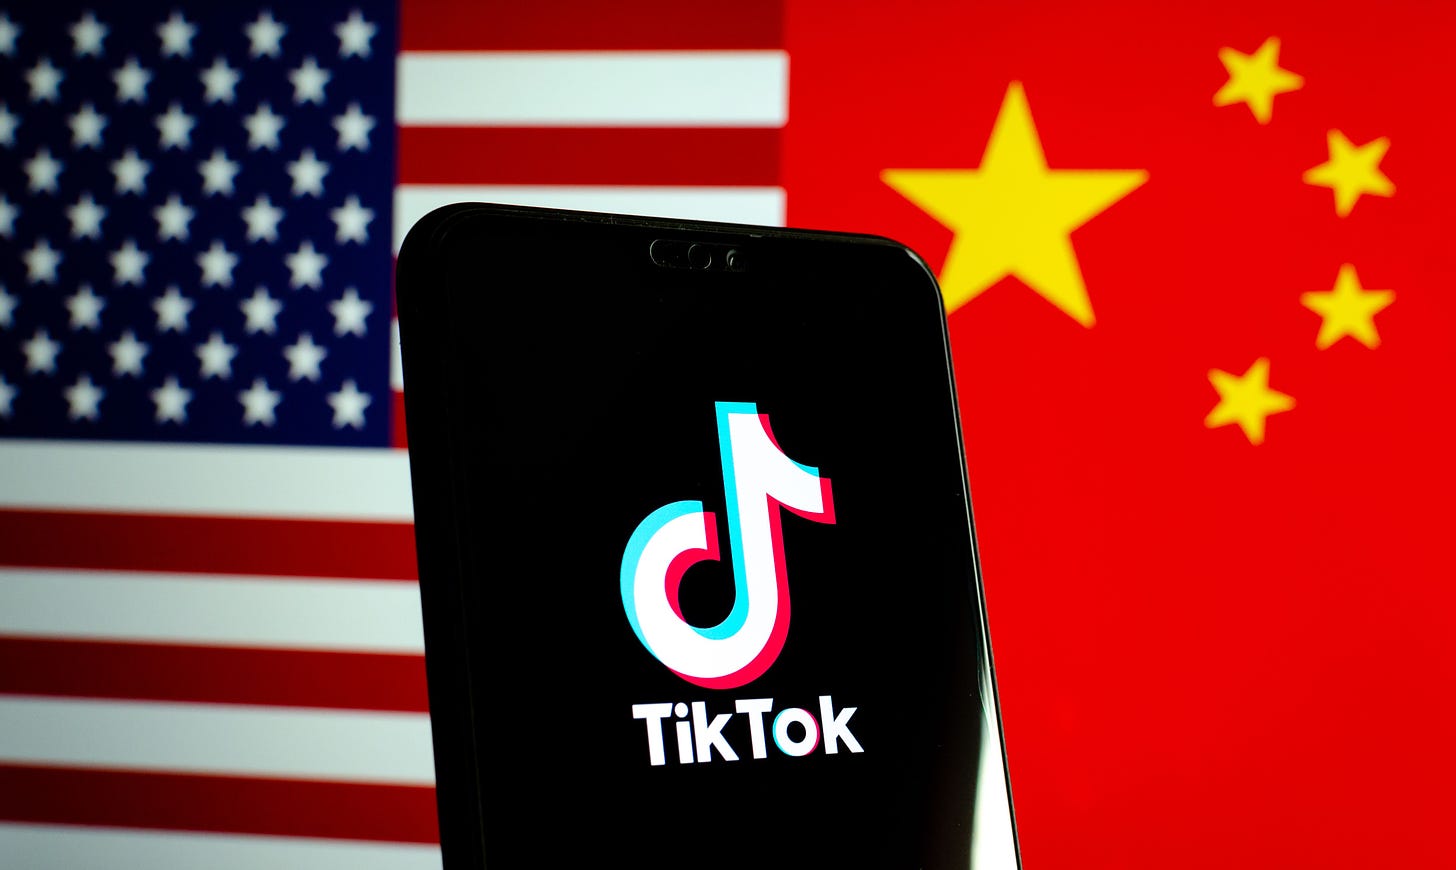 Why is the Trump administration banning TikTok and WeChat?